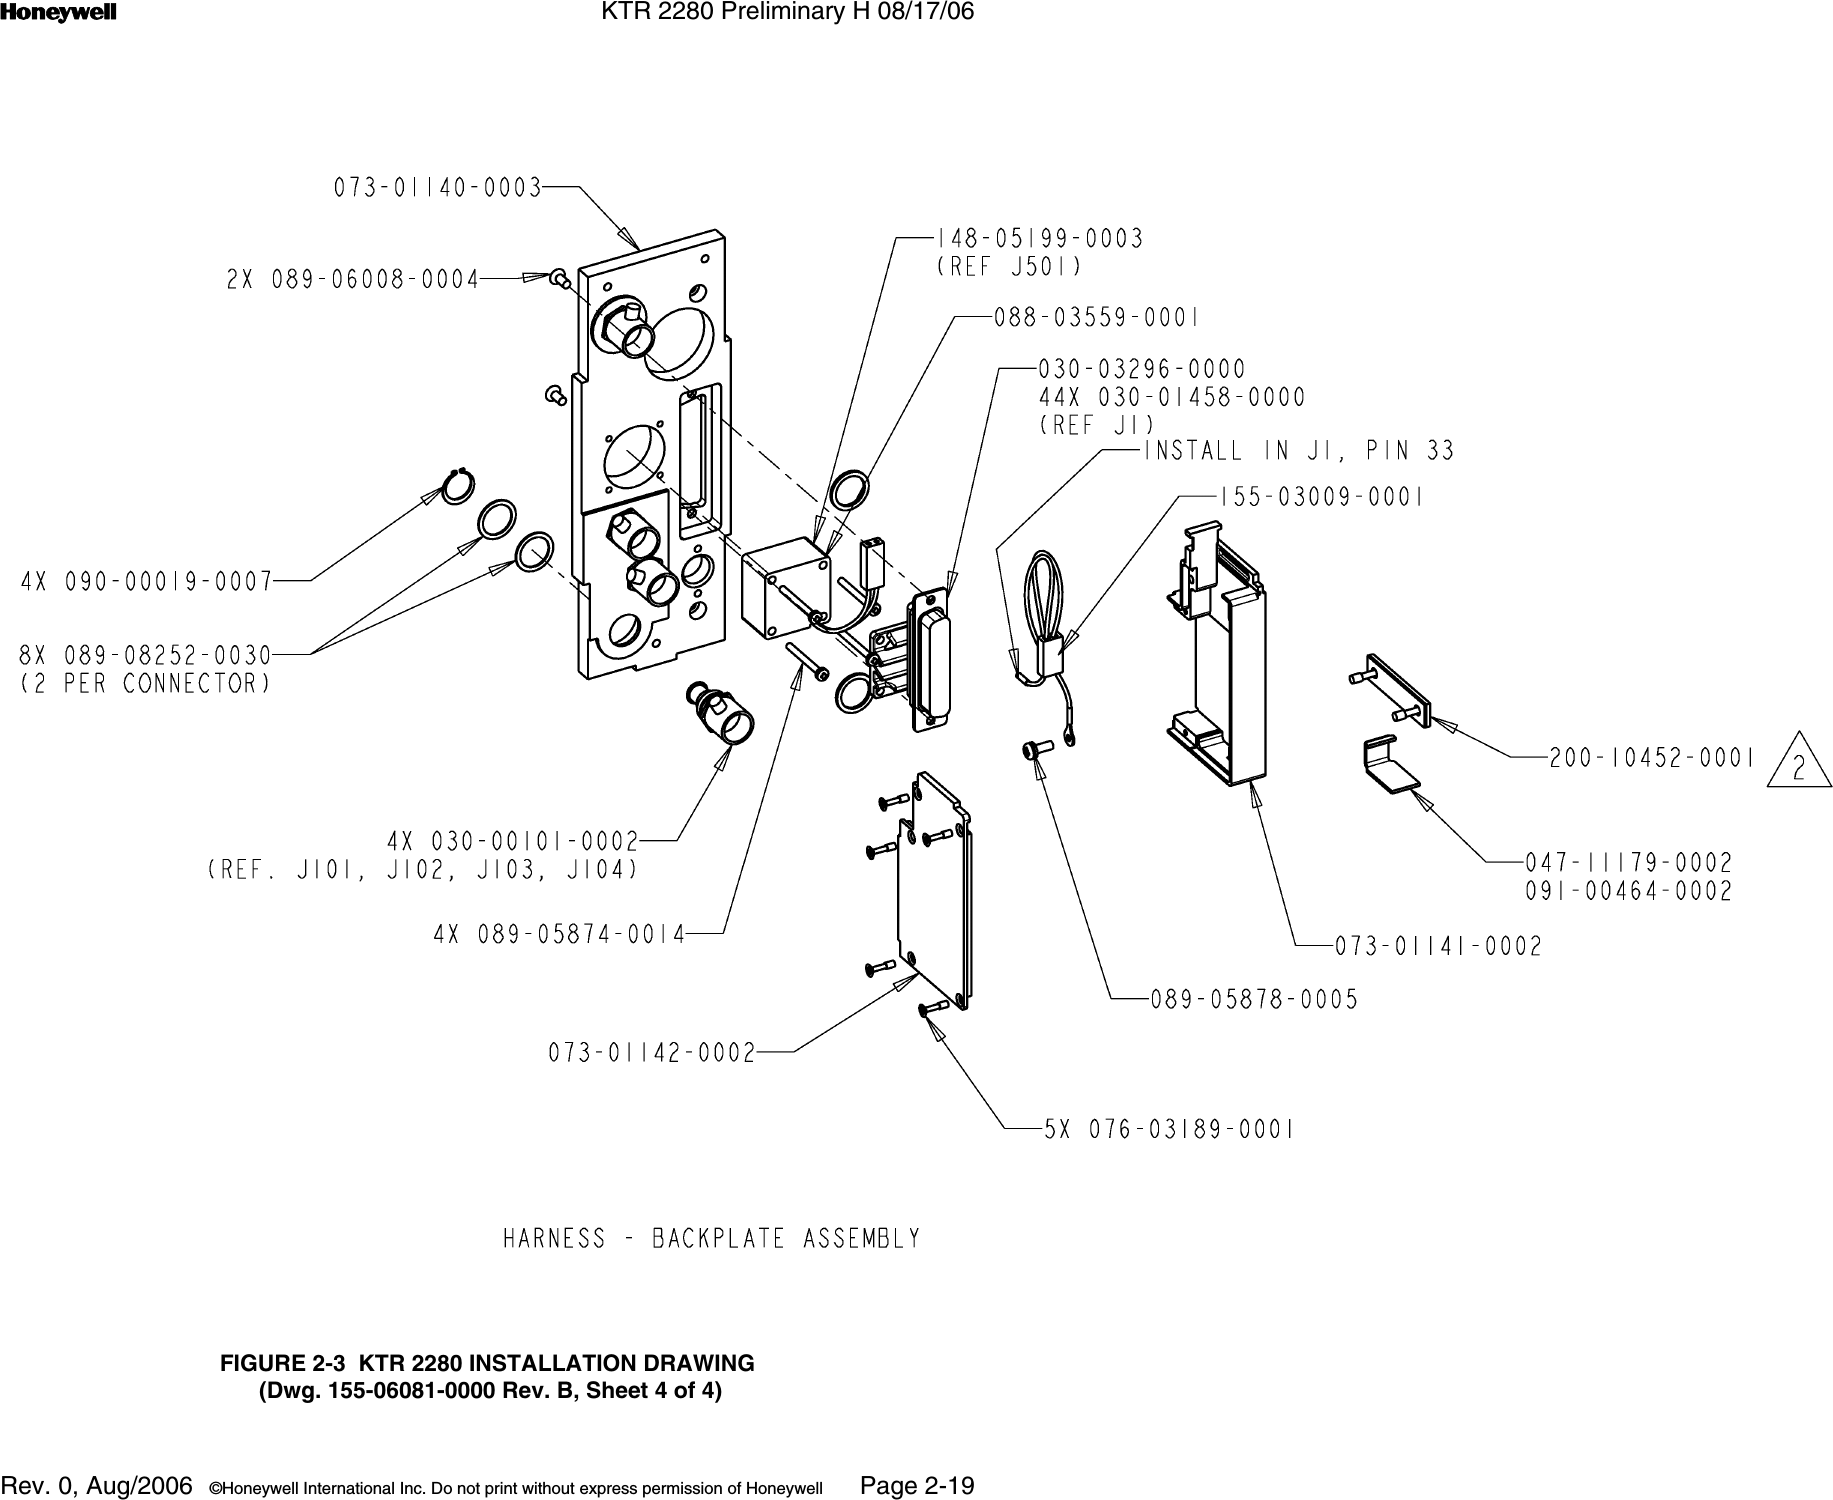 n KTR 2280 Preliminary H 08/17/06Rev. 0, Aug/2006  ©Honeywell International Inc. Do not print without express permission of Honeywell Page 2-19FIGURE 2-3  KTR 2280 INSTALLATION DRAWING (Dwg. 155-06081-0000 Rev. B, Sheet 4 of 4)